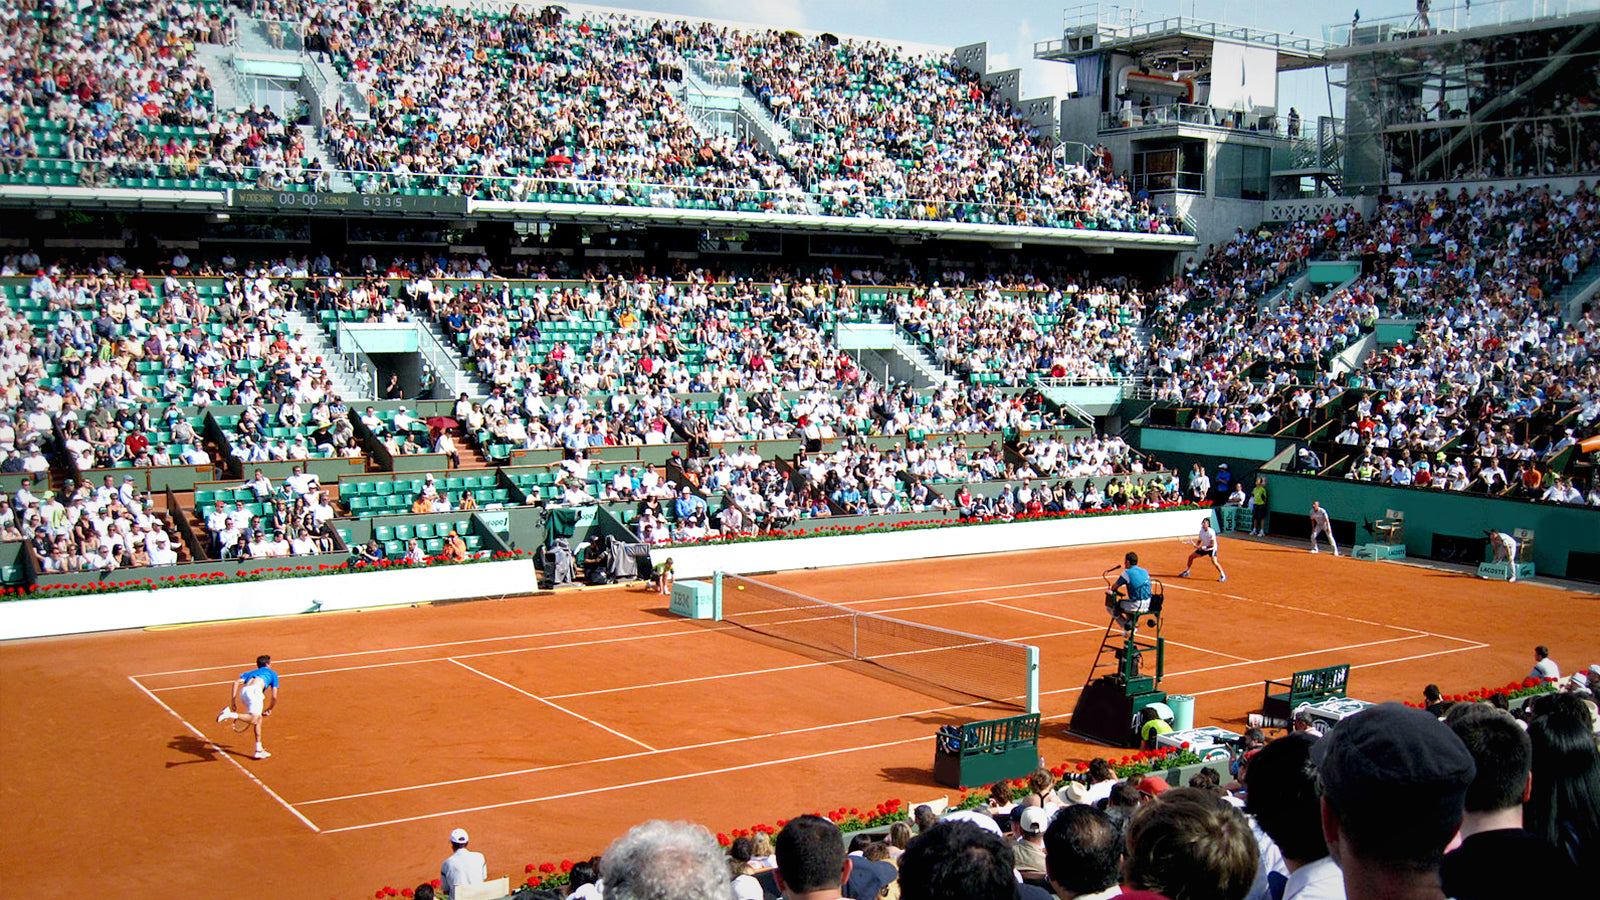 Score Premium Seats at the French Open Finals in Paris